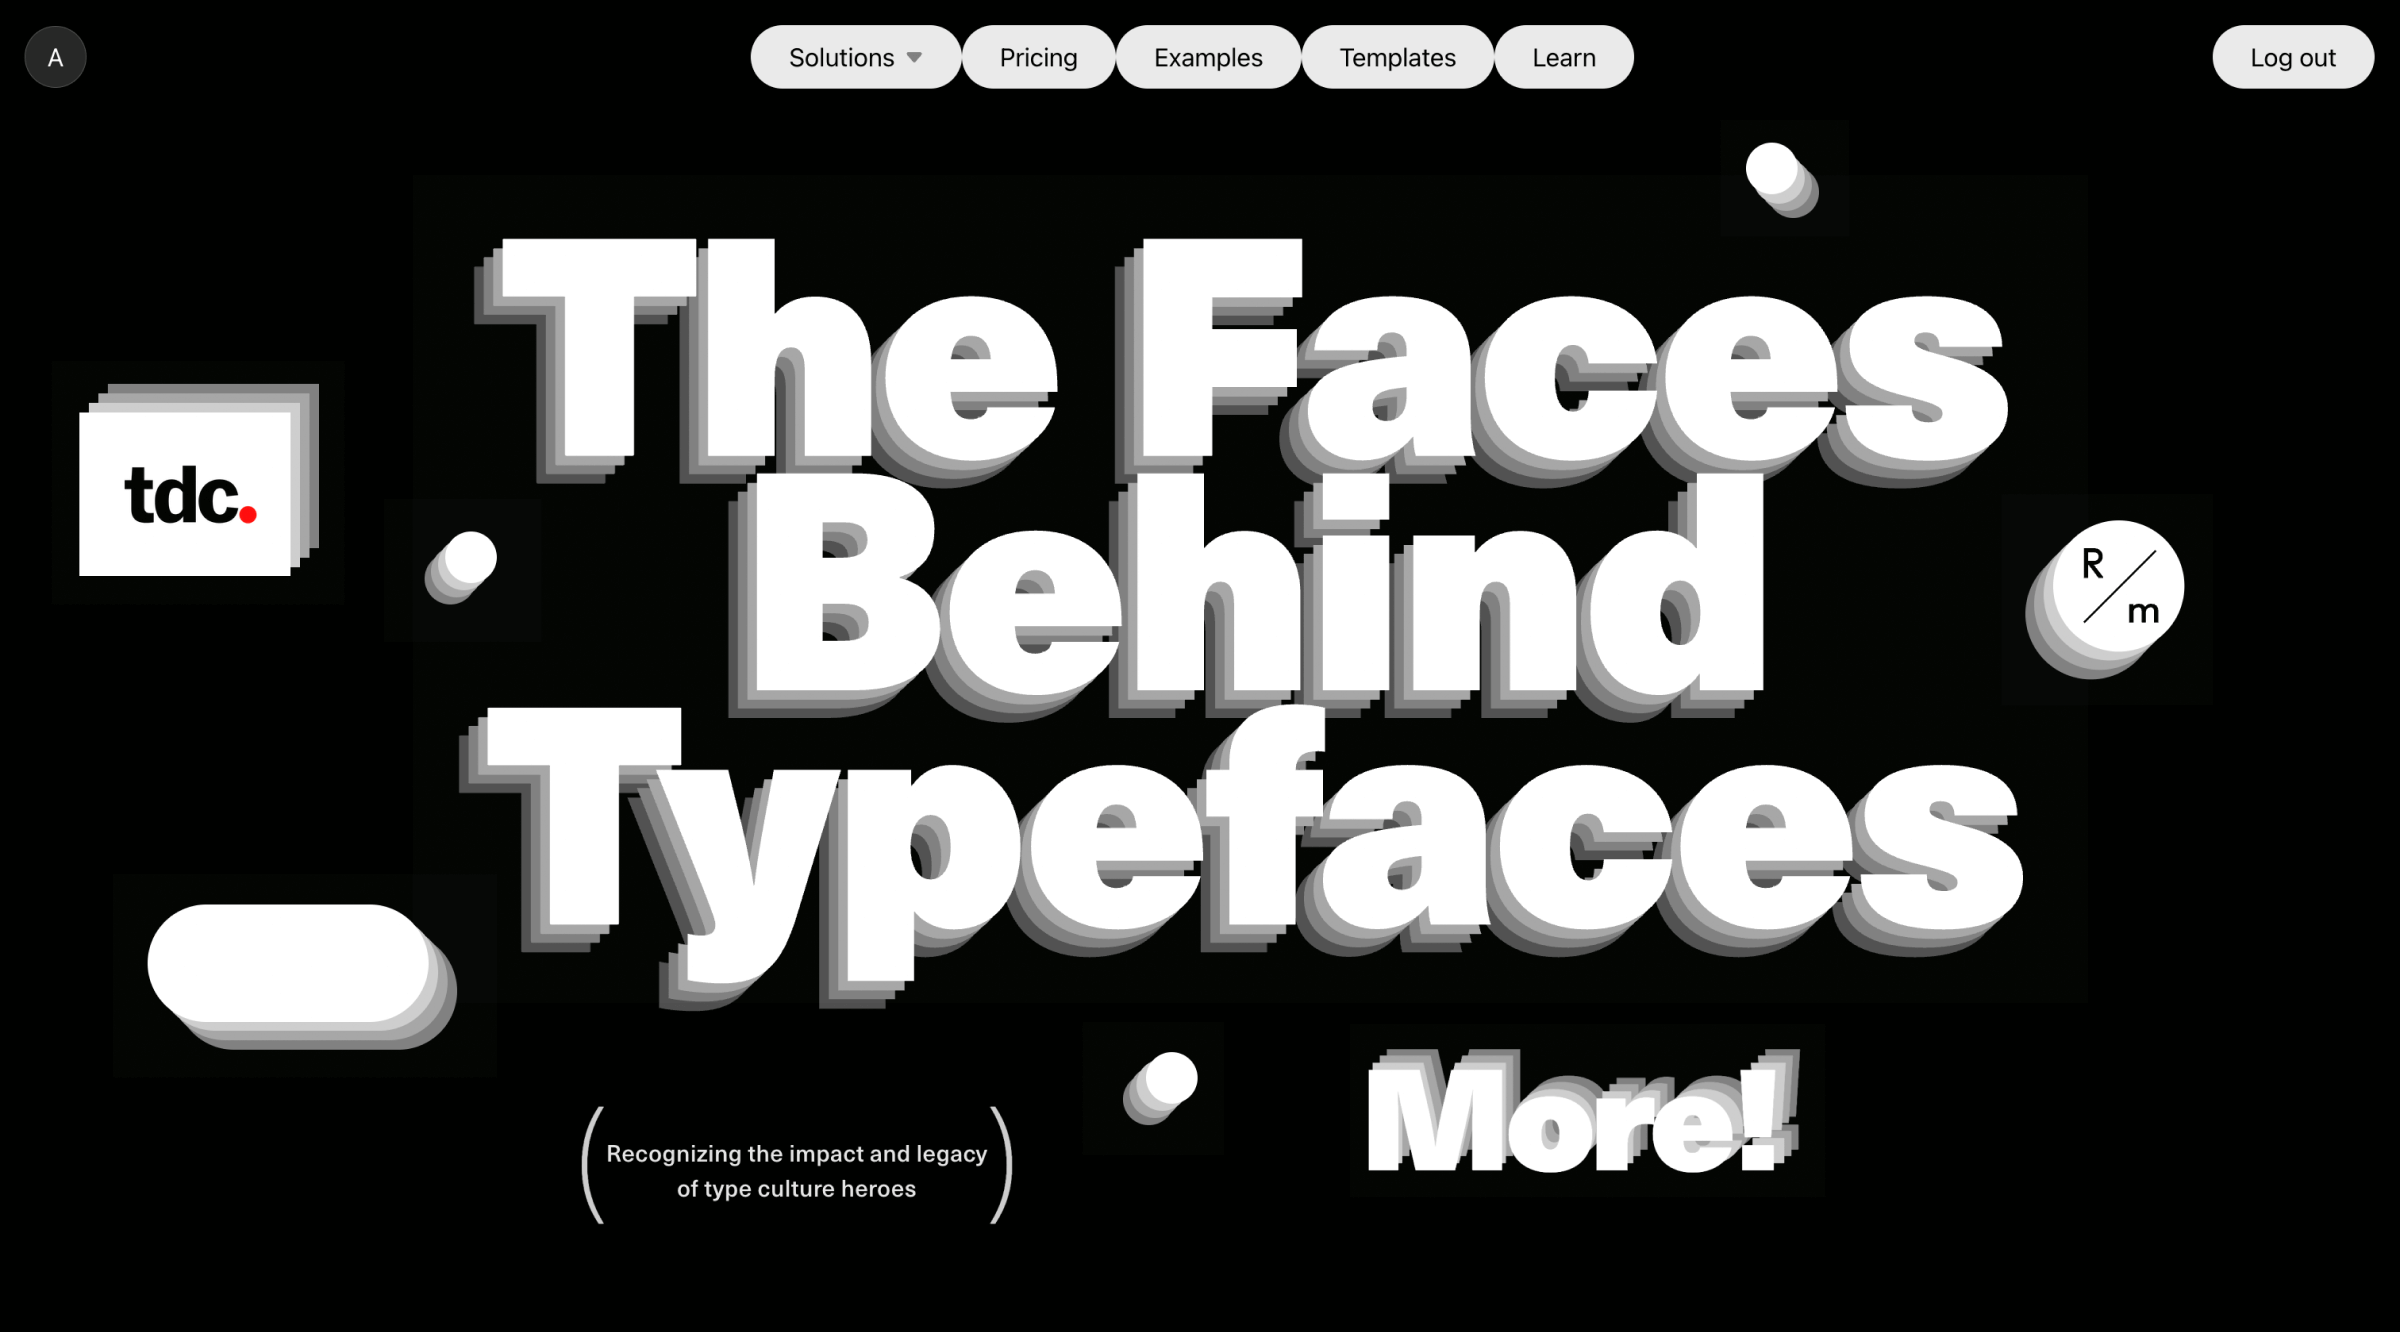 Screenshot from The Faces Behind Typefaces